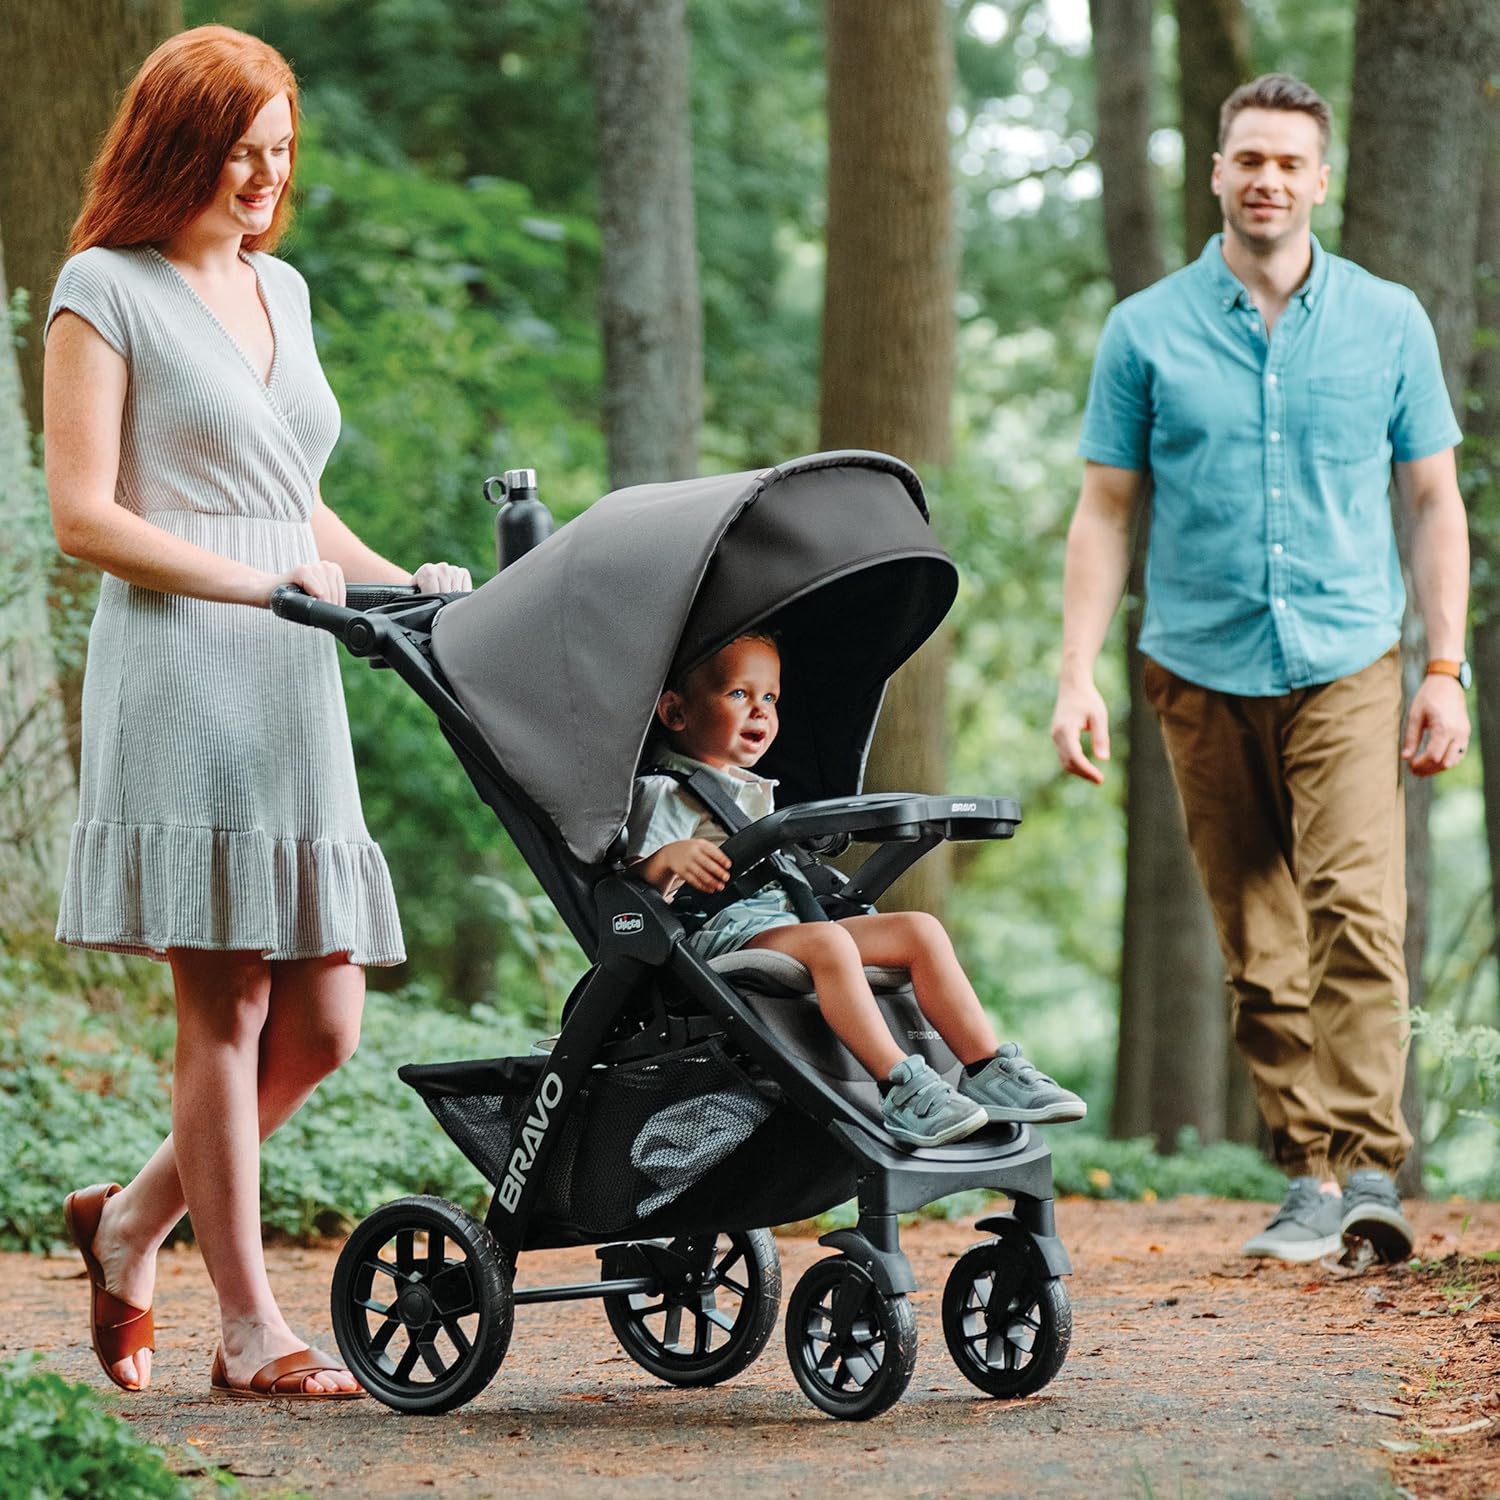 Chicco Bravo LE ClearTex Quick-Fold Stroller - Pewter | Grey - Chicco Bravo LE ClearTex Quick-Fold Stroller Review